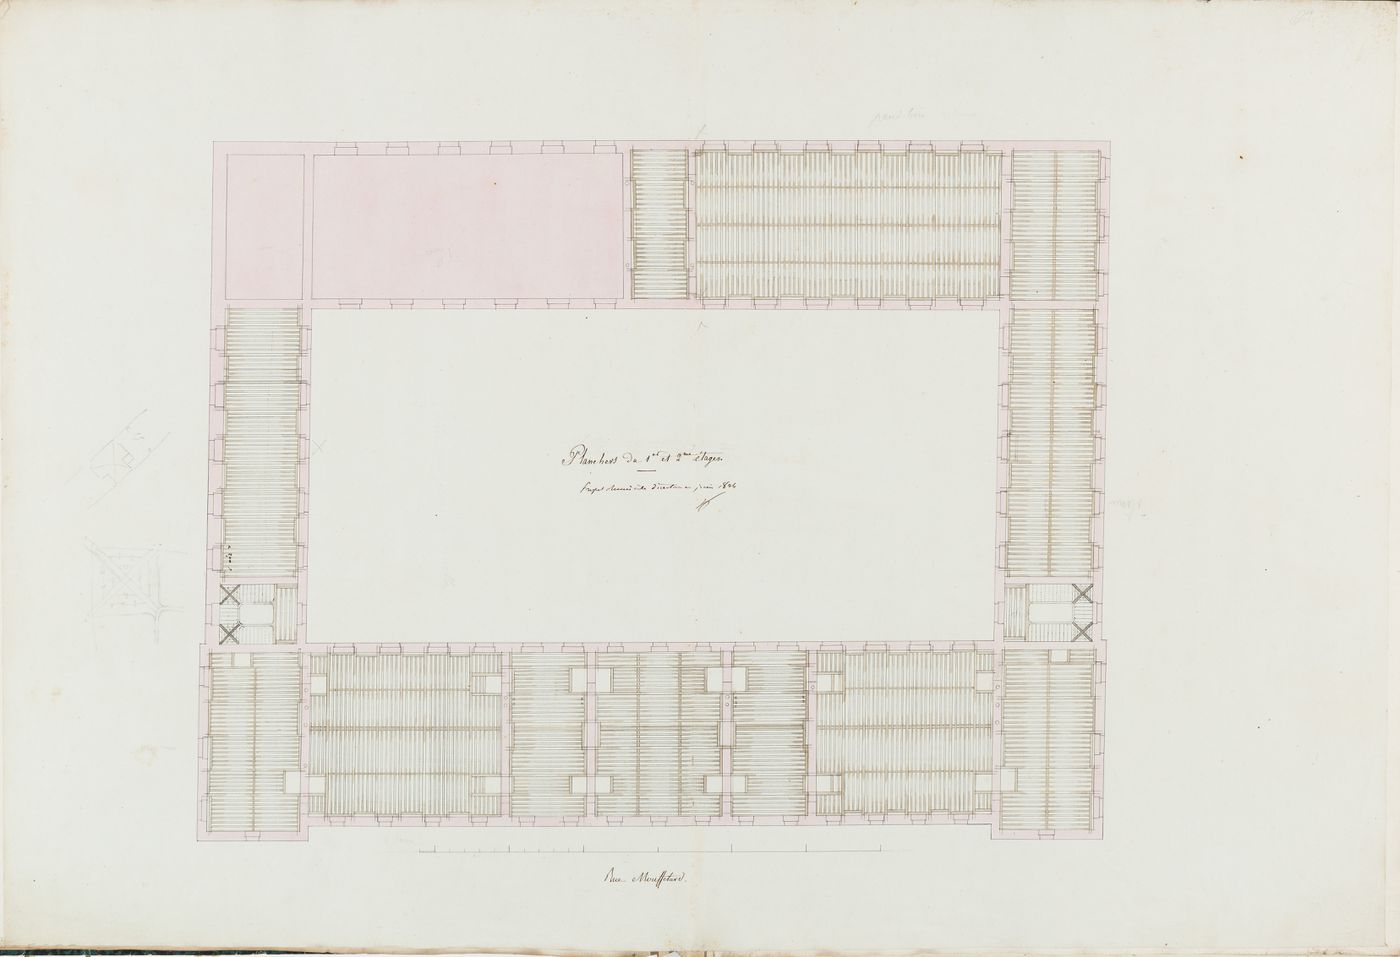 Project for the caserne de la Gendarmerie royale, rue Mouffetard: First and second floor framing plan for the buildings surrounding the first courtyard